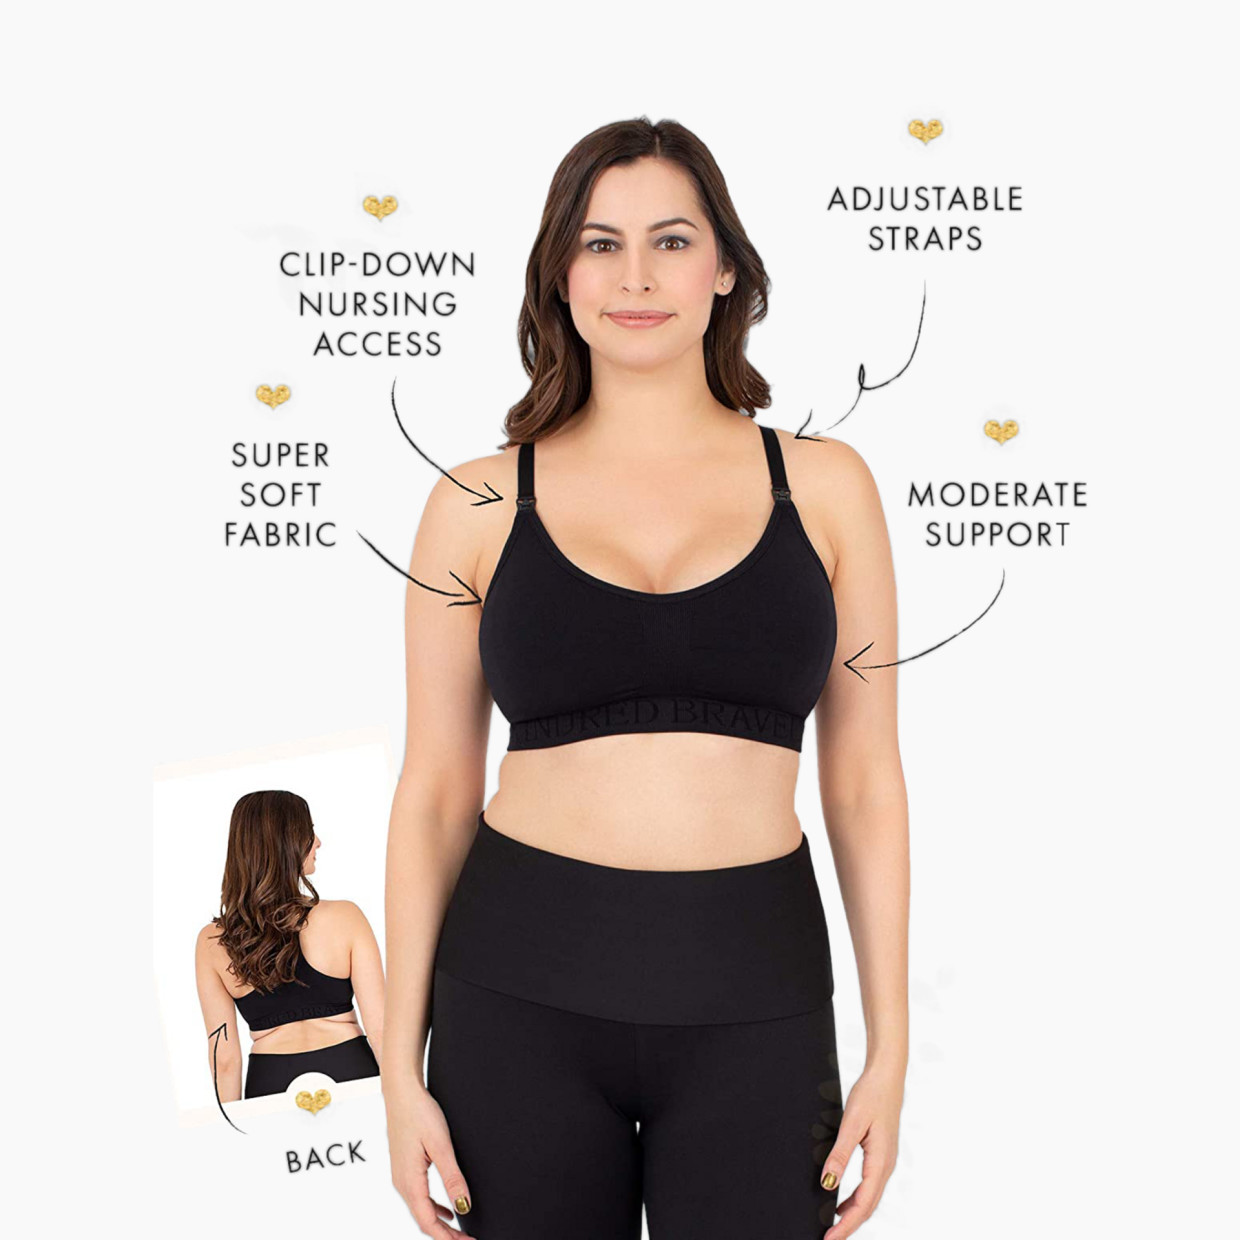 Kindred Bravely Sublime Support Low Impact Nursing & Maternity Sports Bra - Black, X-Large.